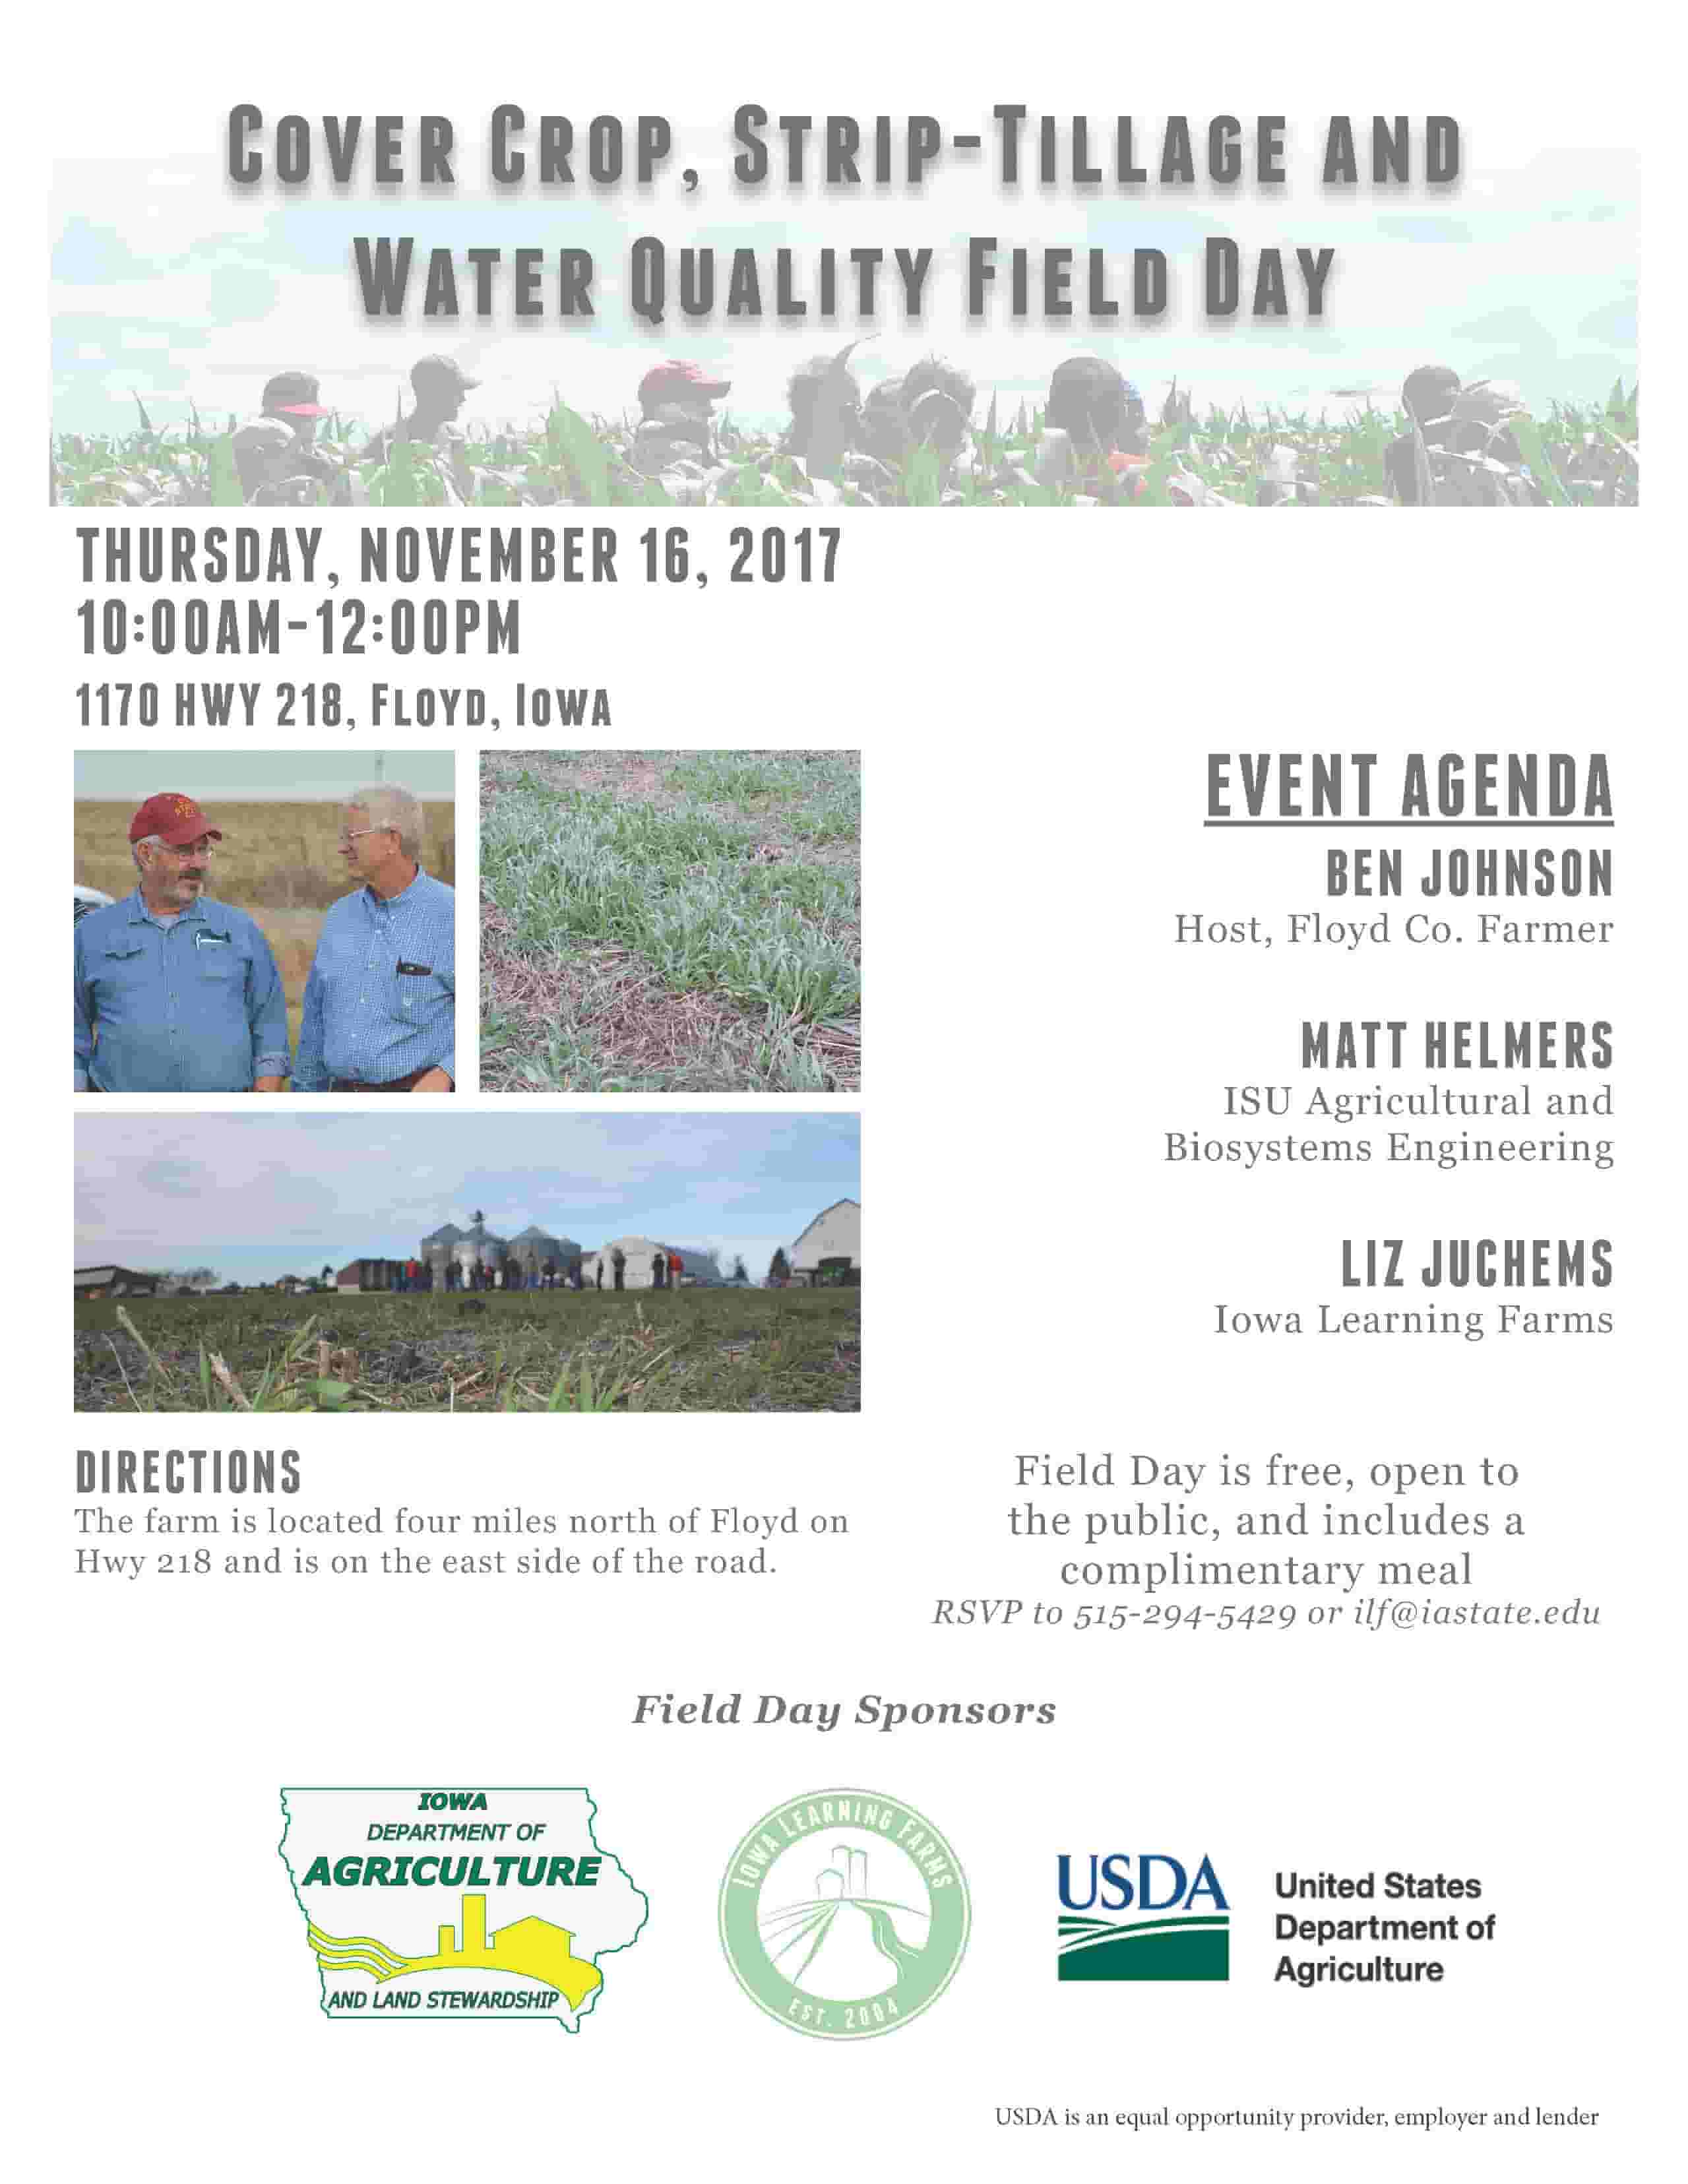 Flyer for water quality field day in Floyd, Iowa with the day's agenda